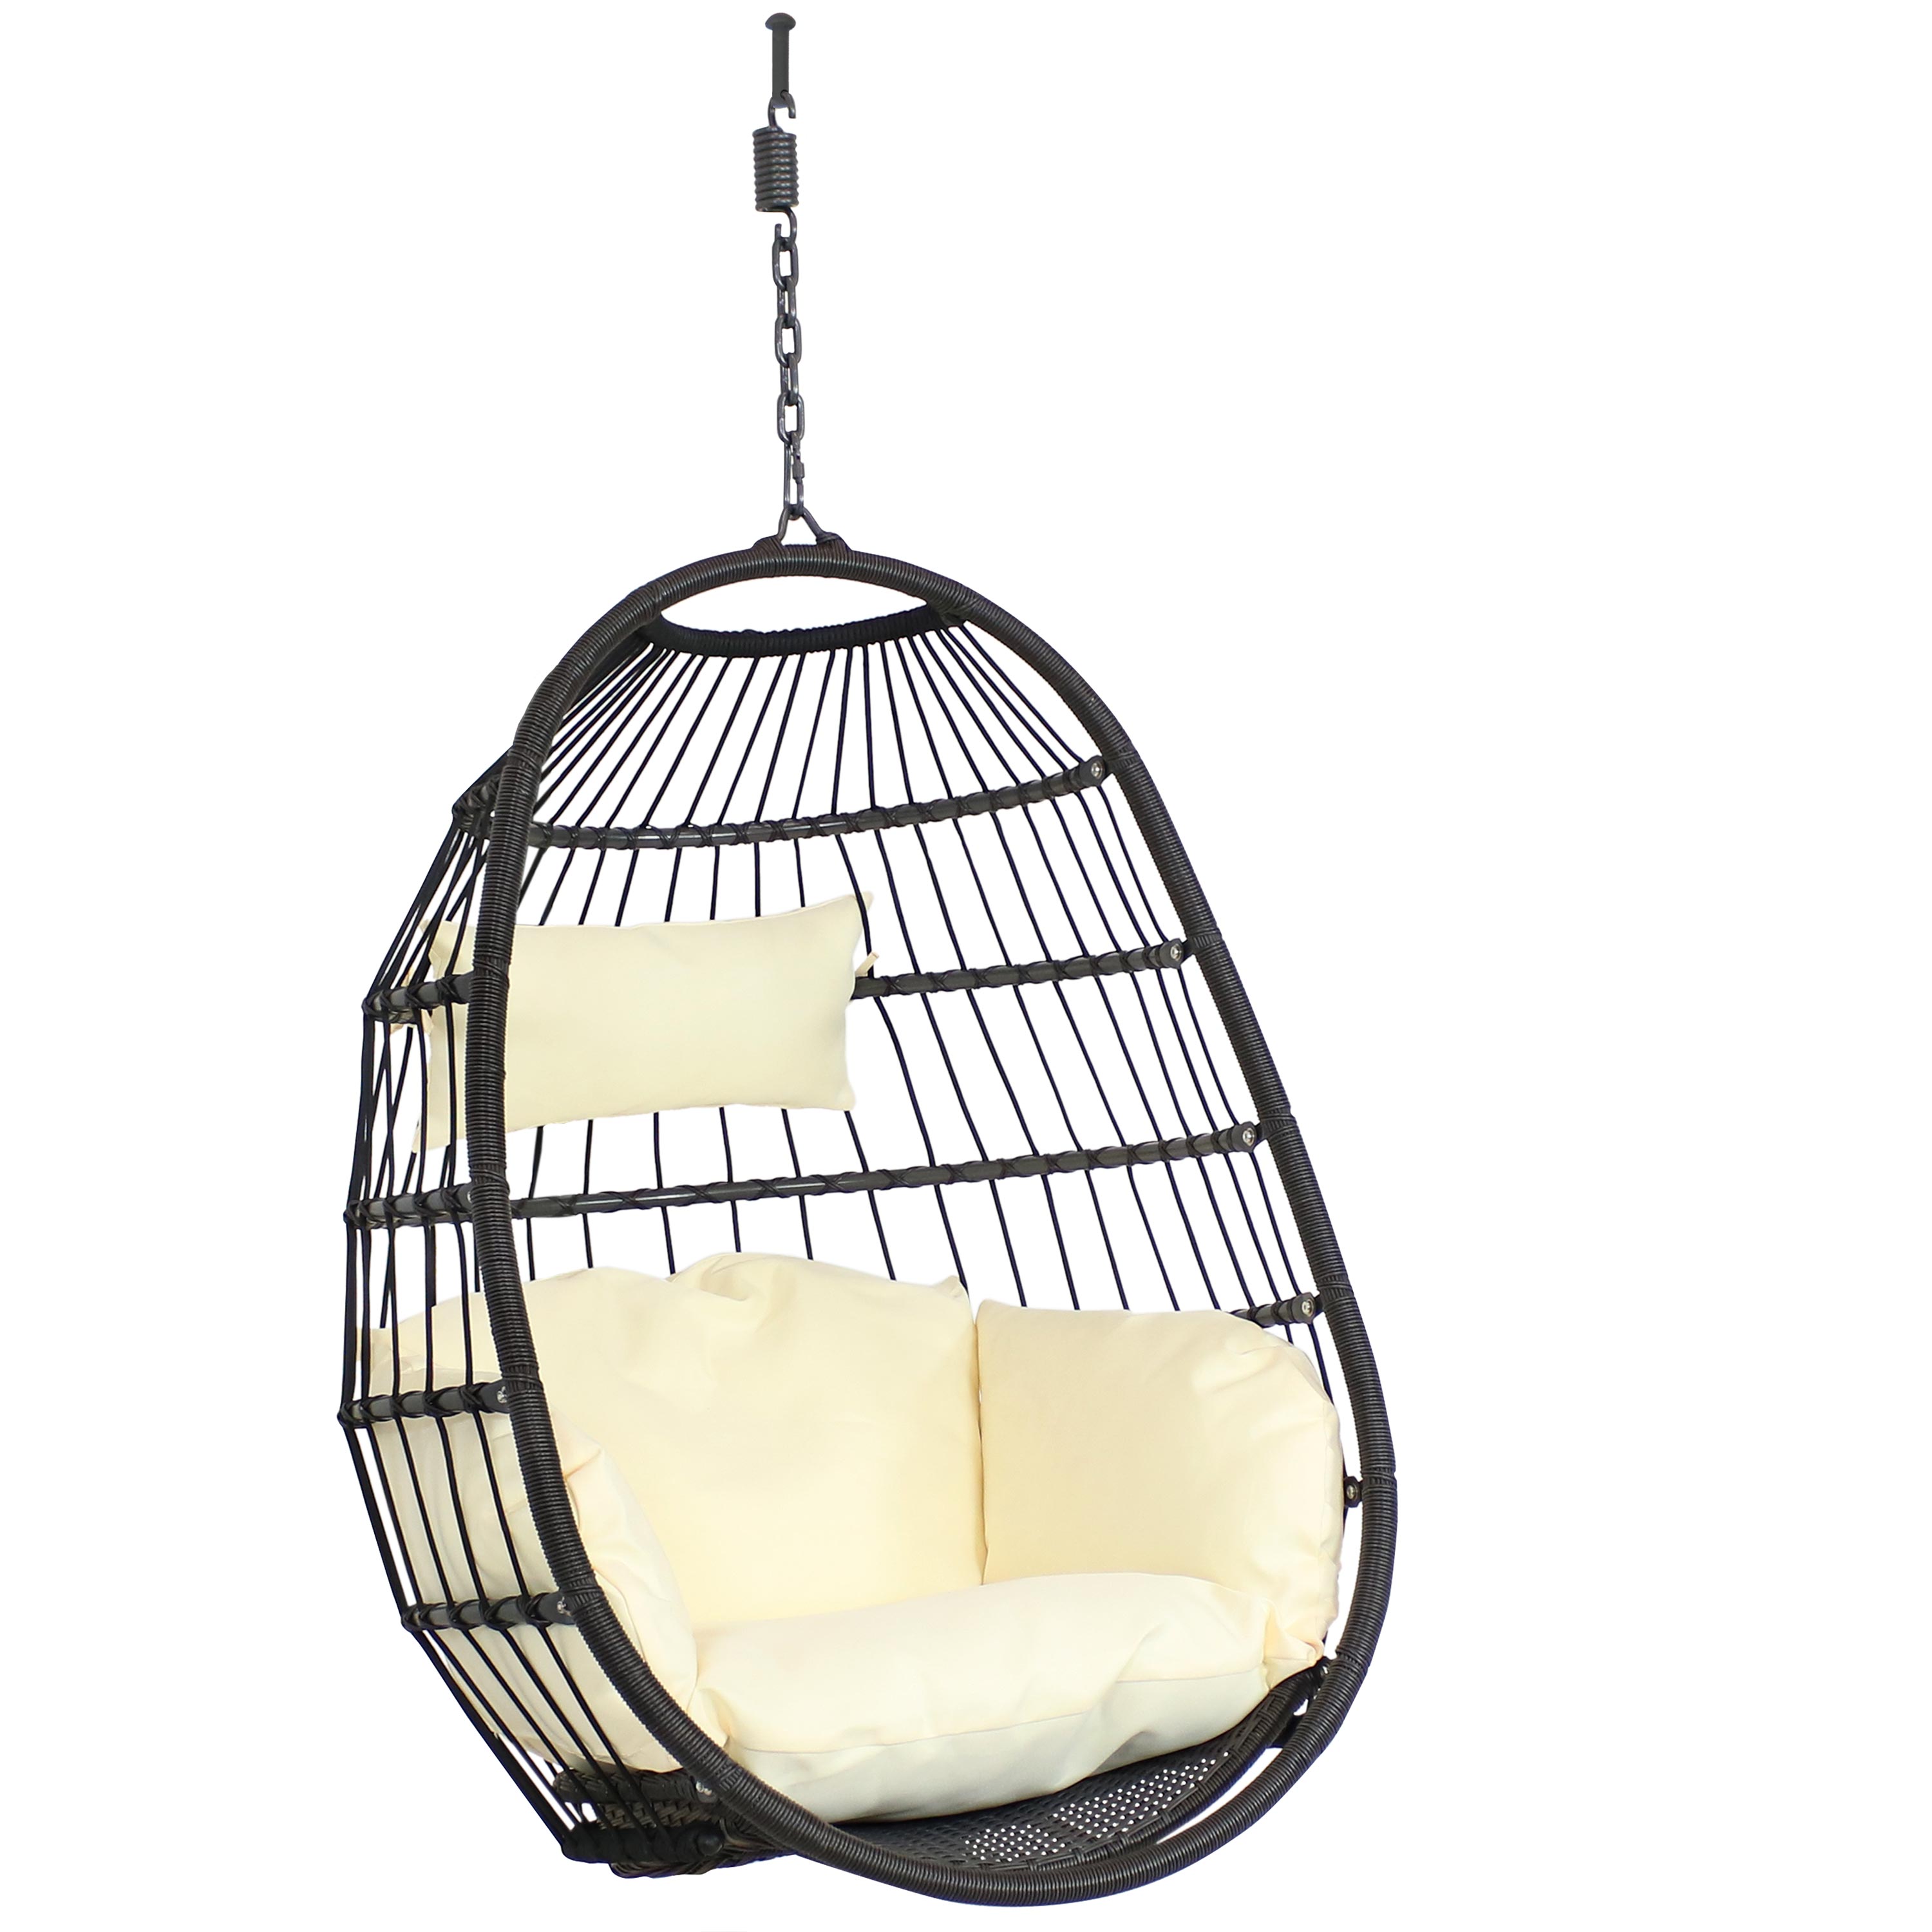 Sunnydaze Penelope Outdoor Hanging Egg Chair with Seat Cushions - Cream - image 1 of 9